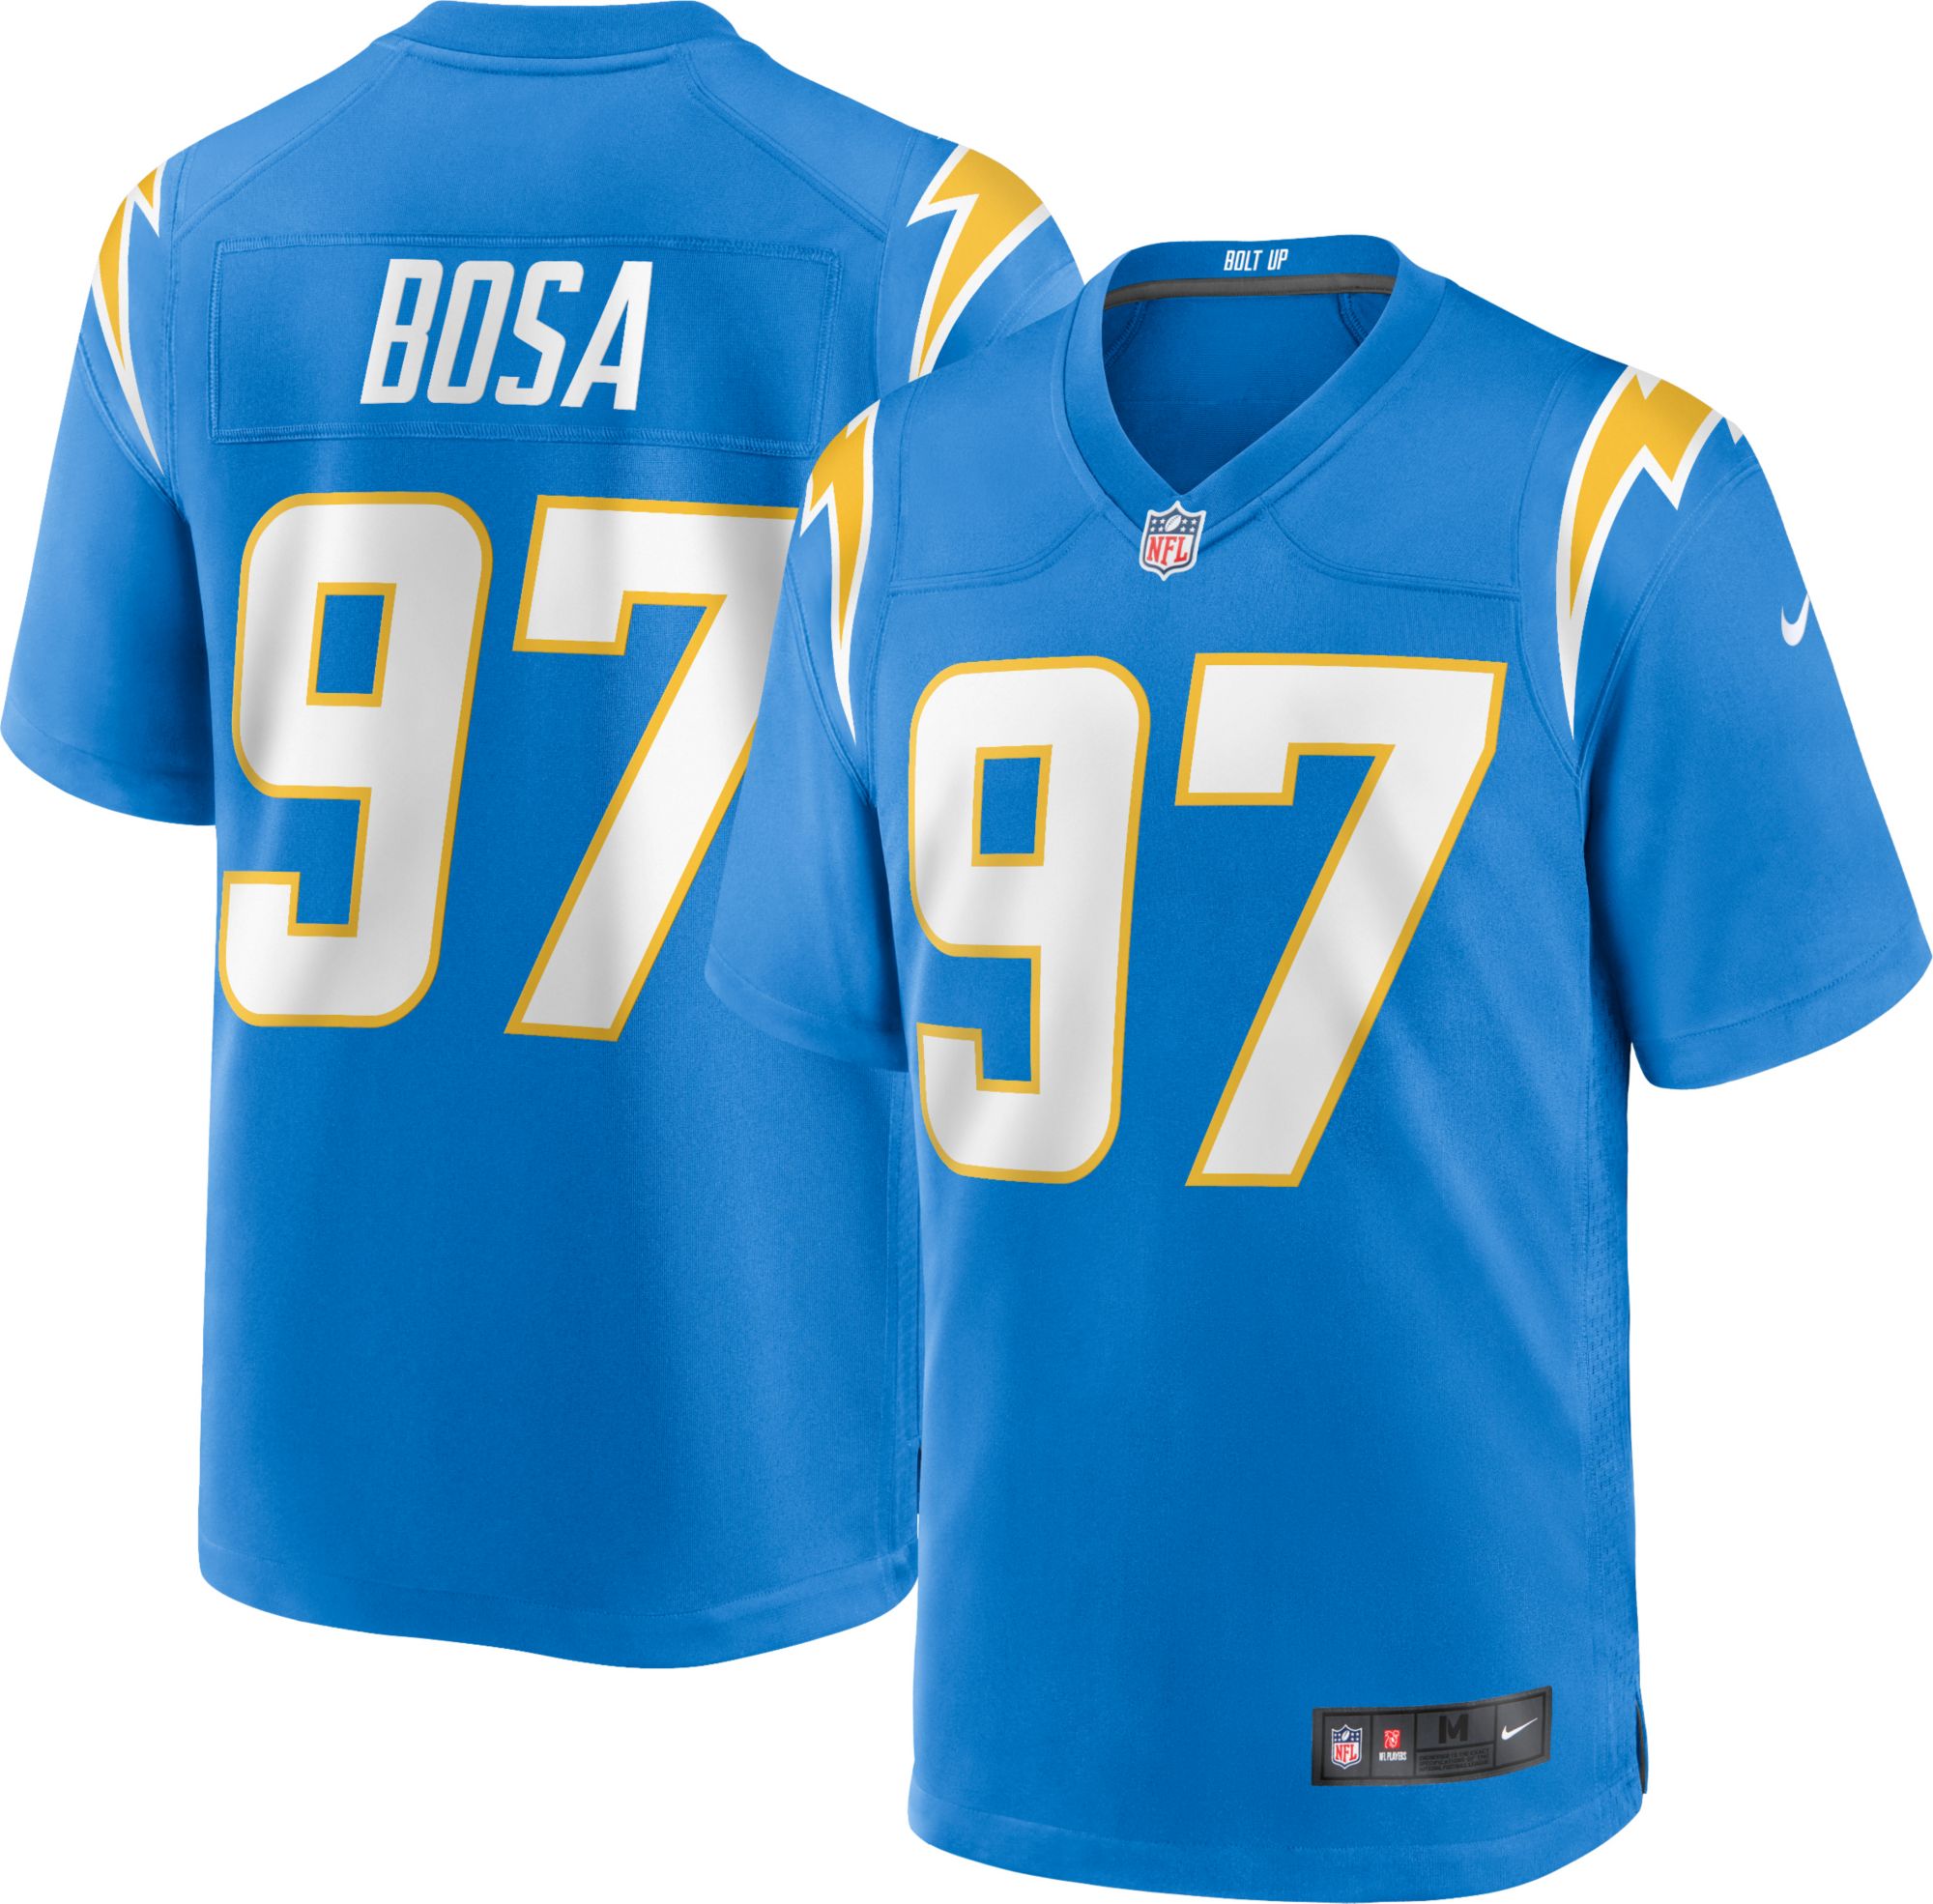 chargers 21 jersey